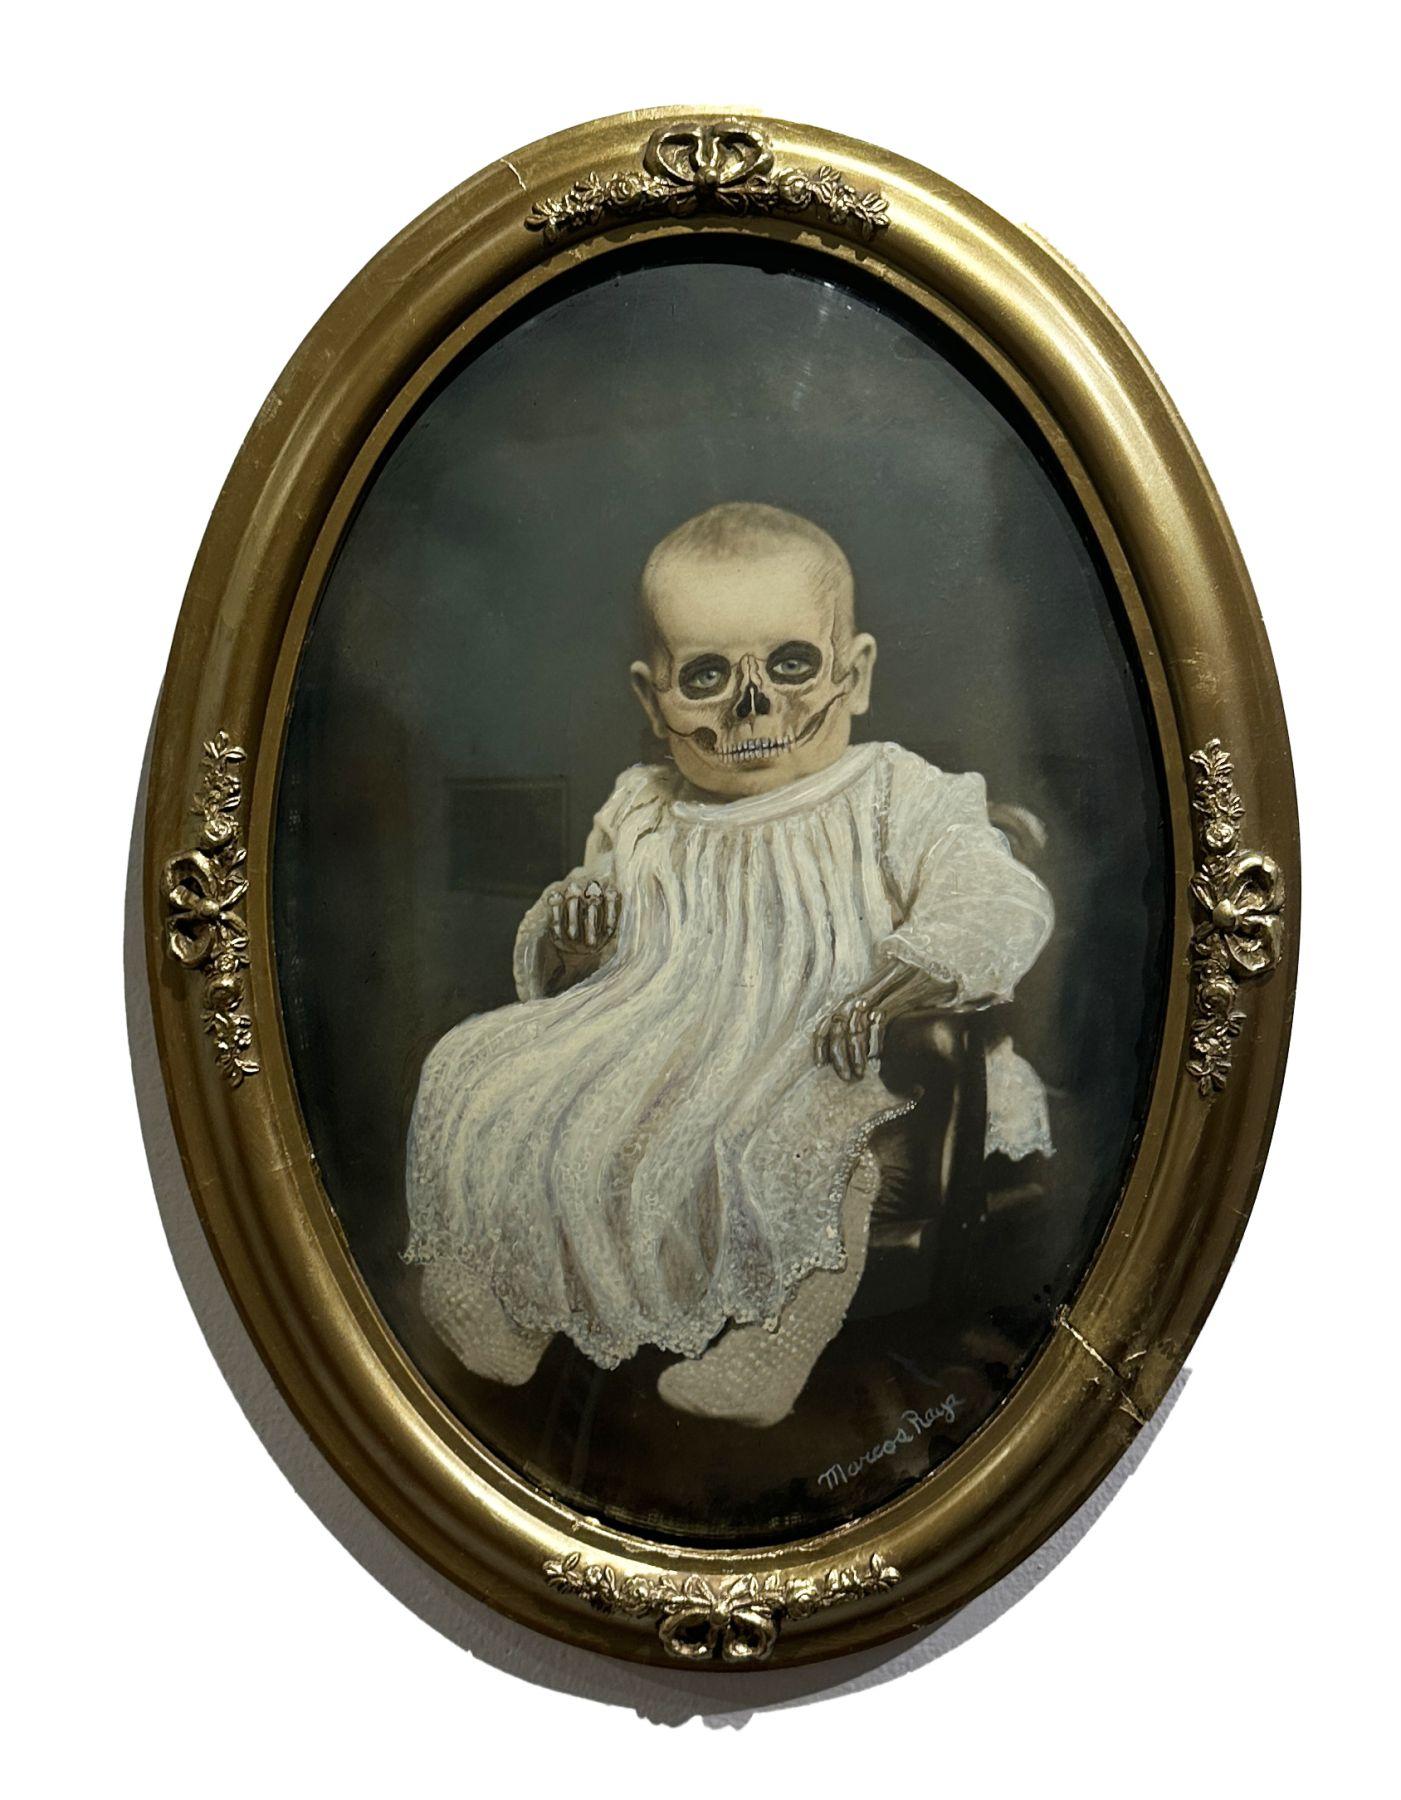 Marcos Raya Figurative Photograph - Baby Joe - Antique Painted and Appropriated Photograph, Original Frame